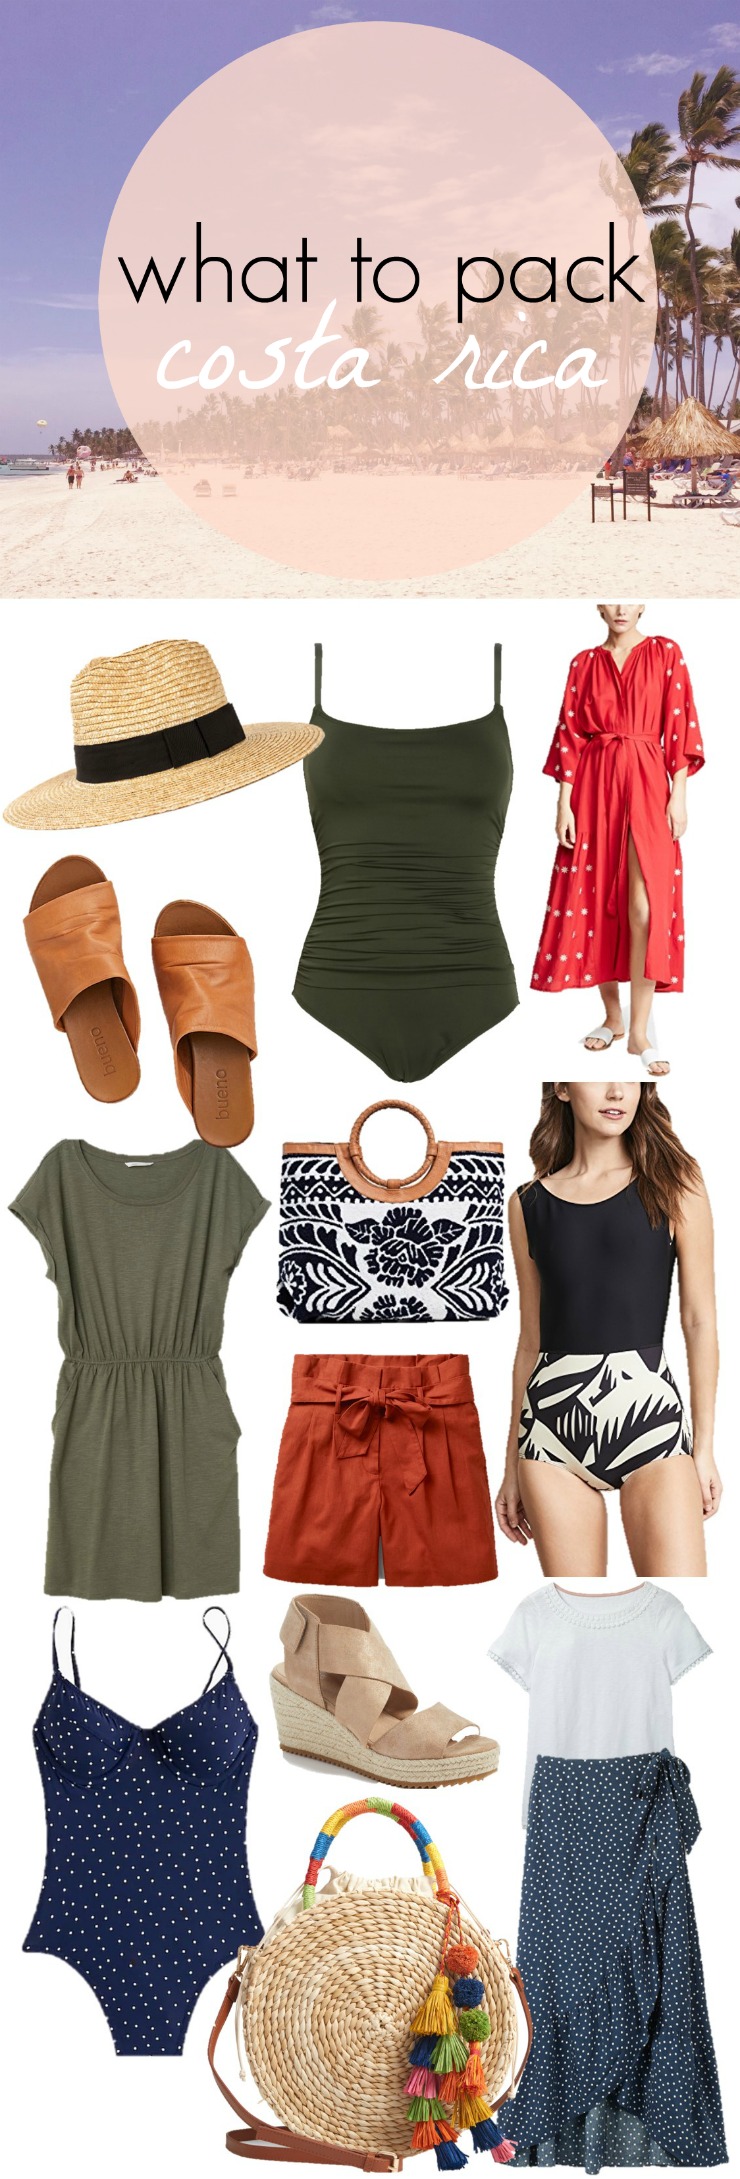 what to pack for costa rica, costa rica packing list